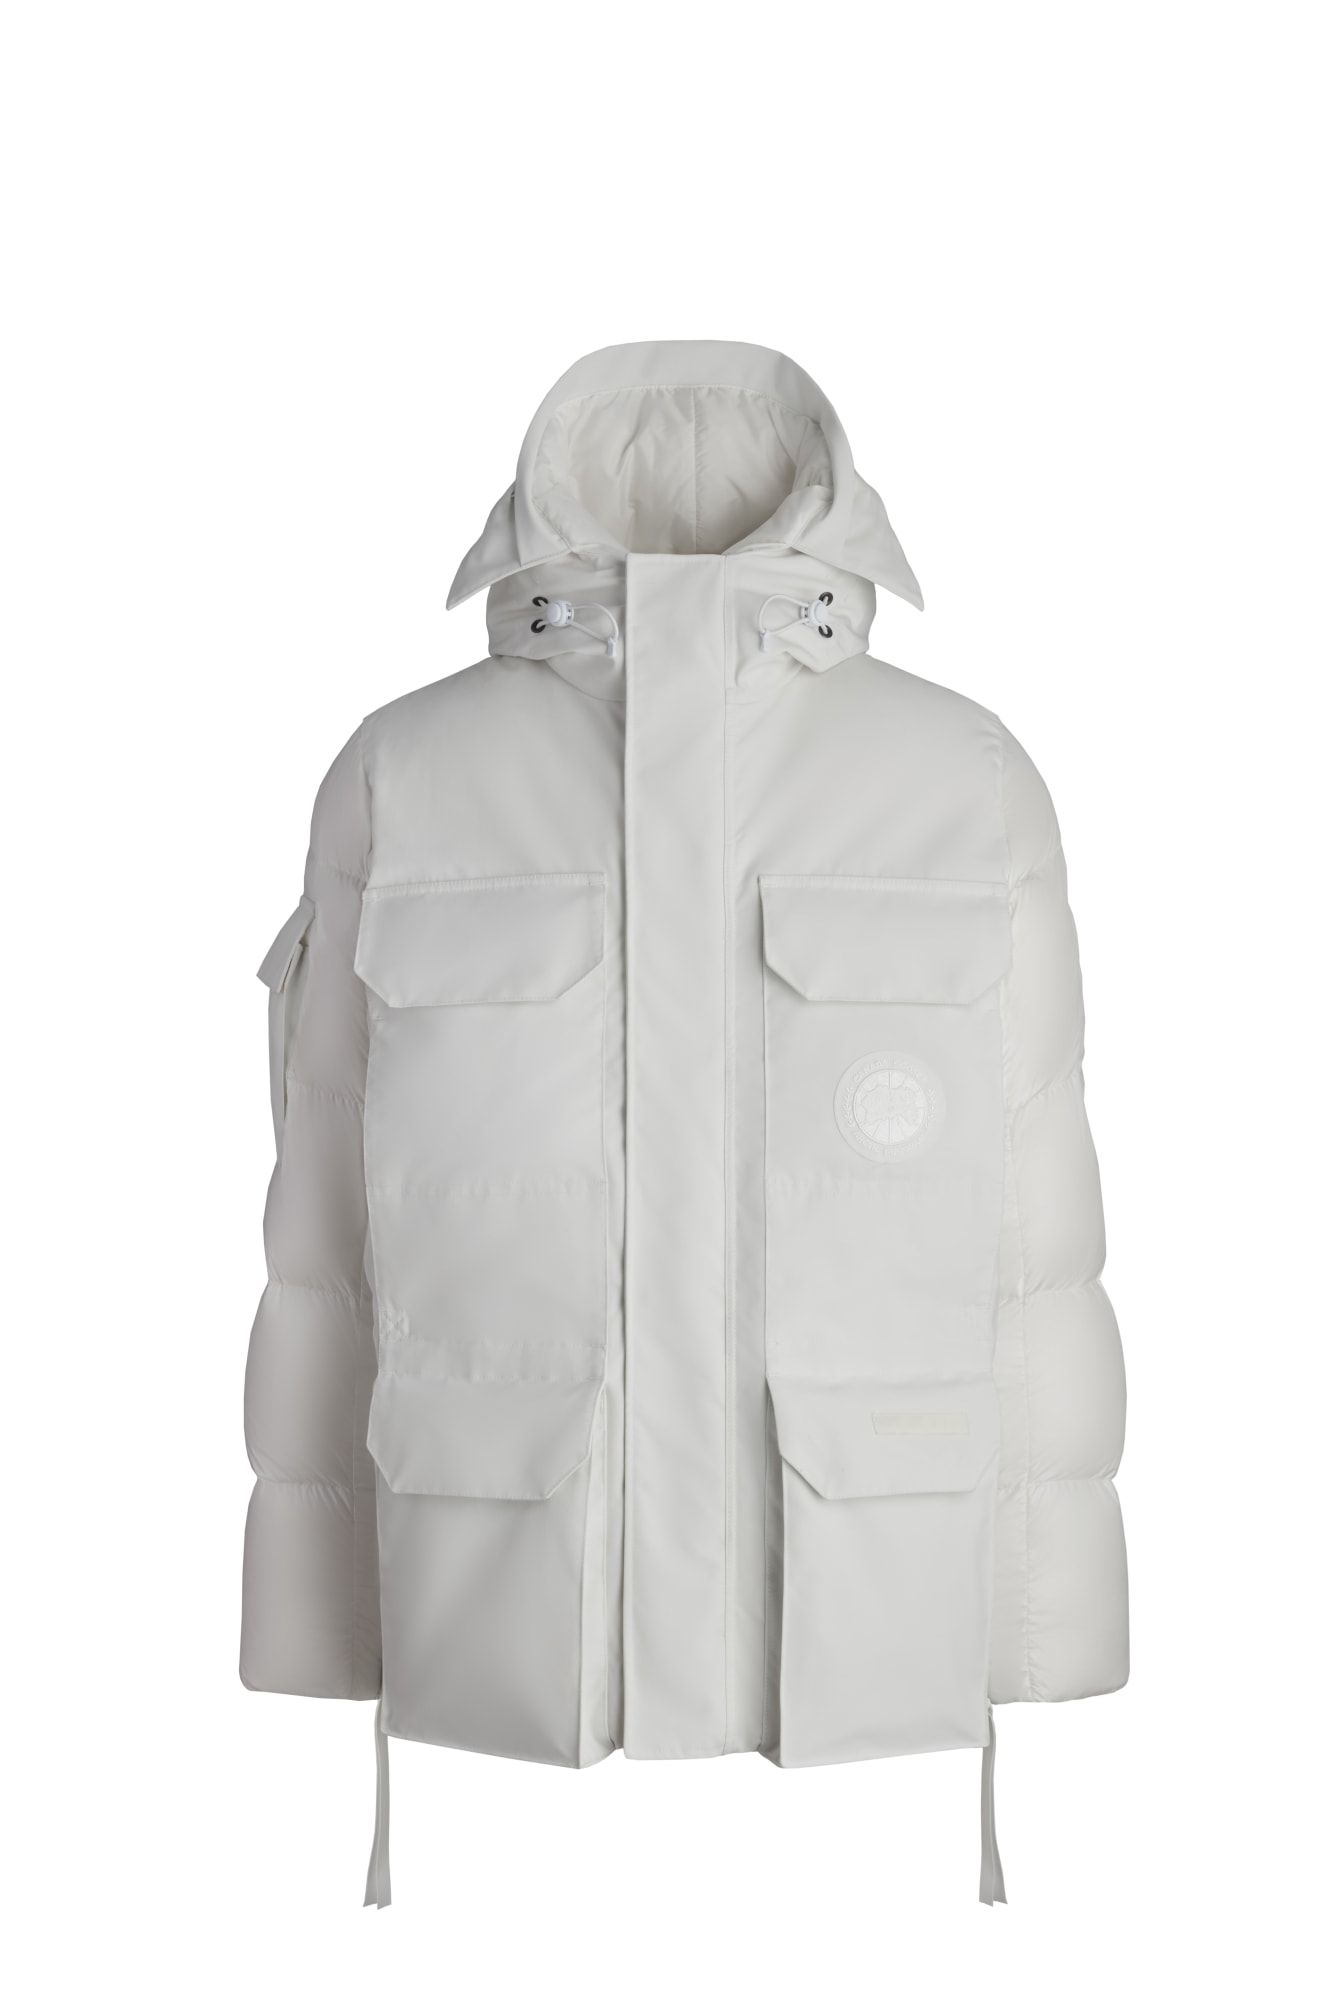 The Standard Expedition Parka for Men